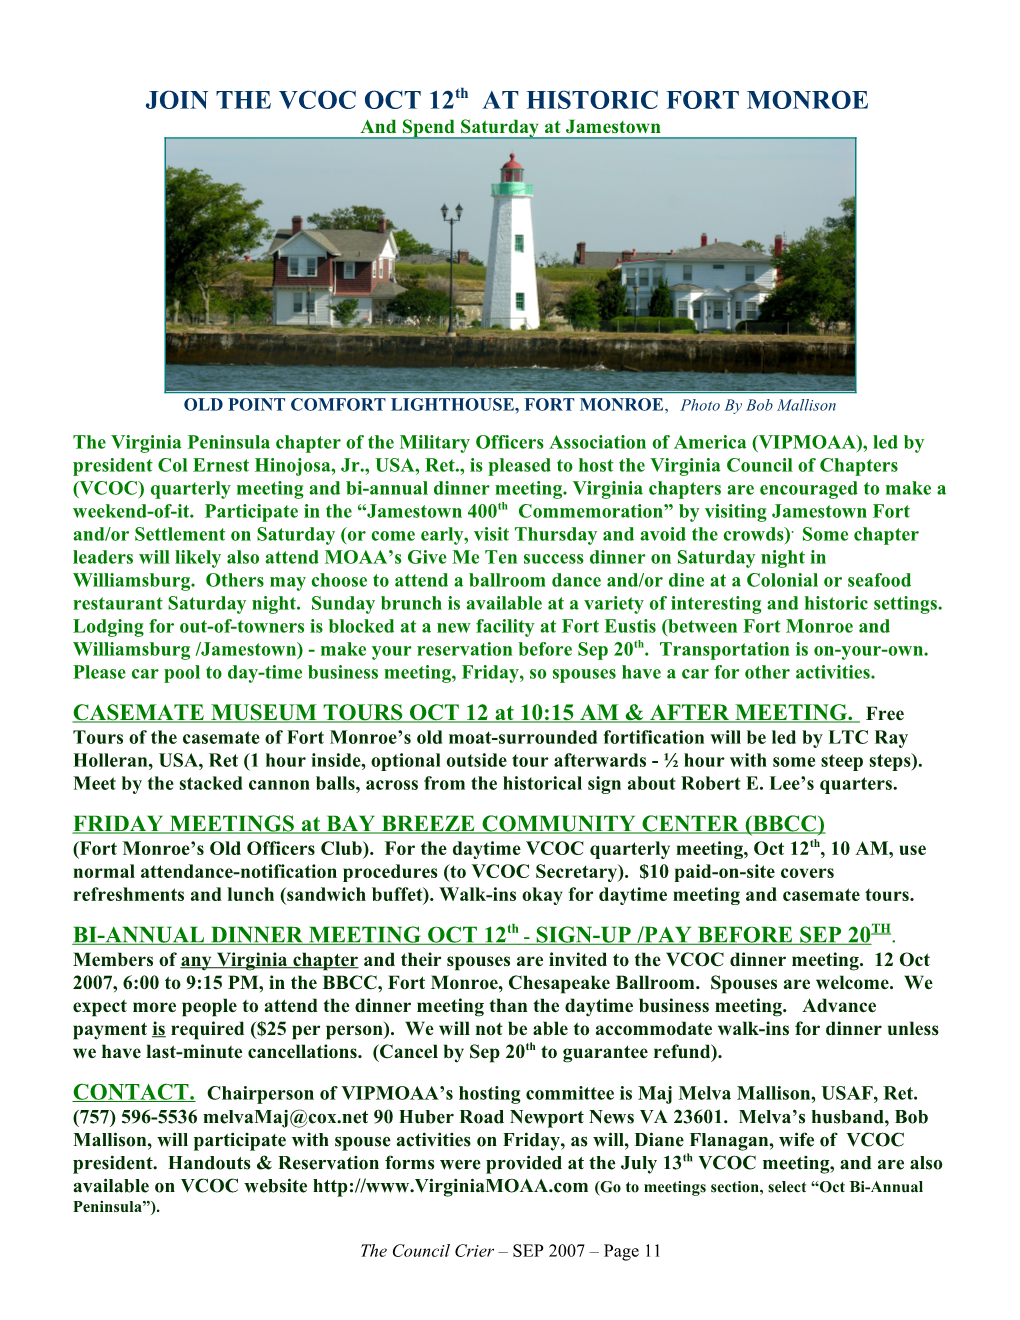 Join the Vcoc Oct 12 at Historic Fort Monroe